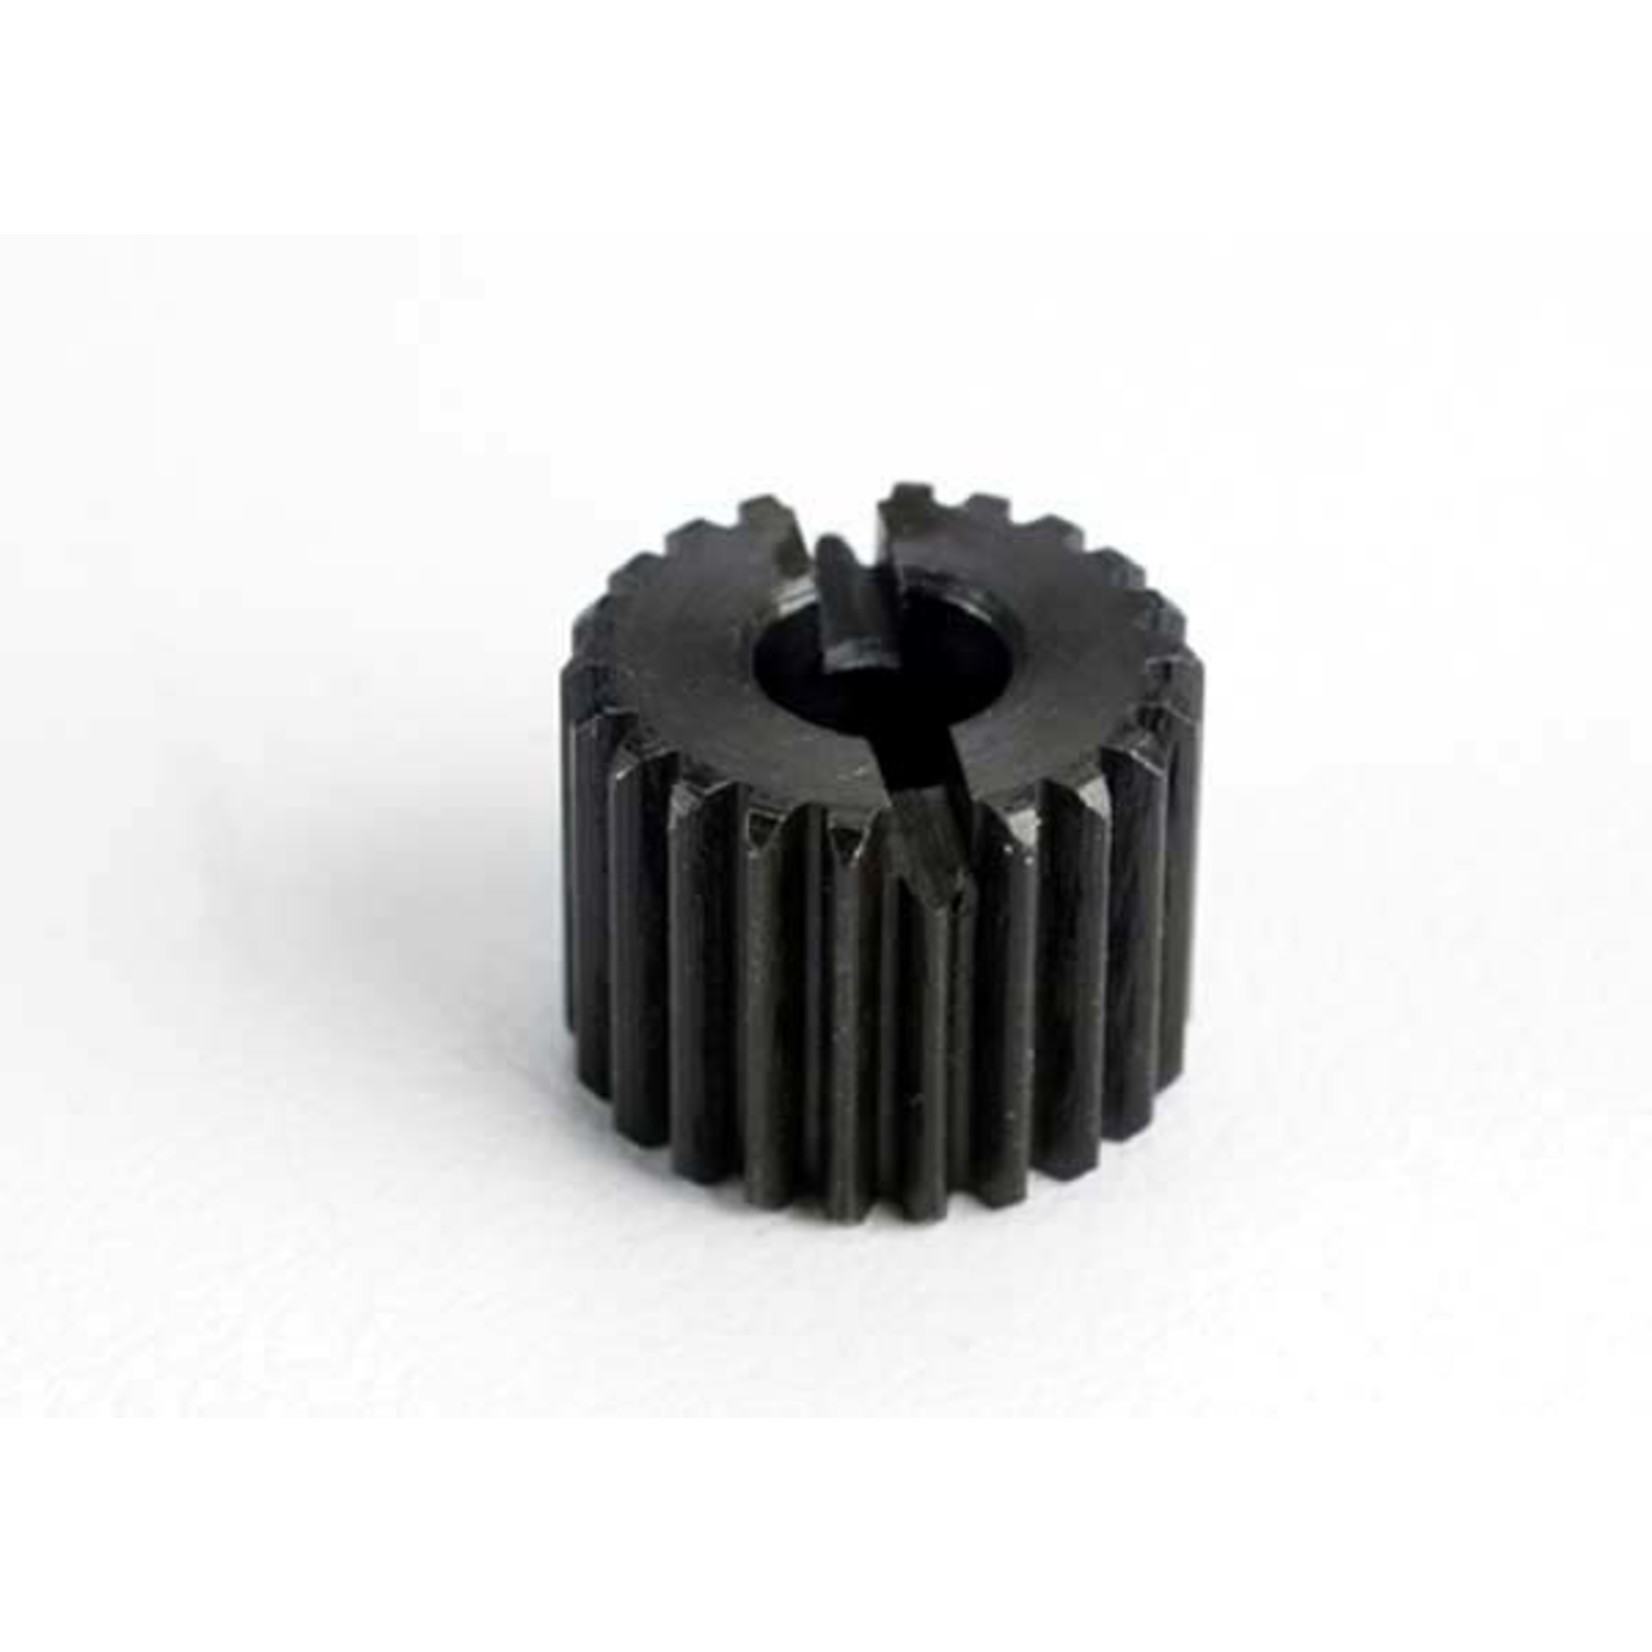 Traxxas 3195 - Top drive gear, steel (22-tooth)